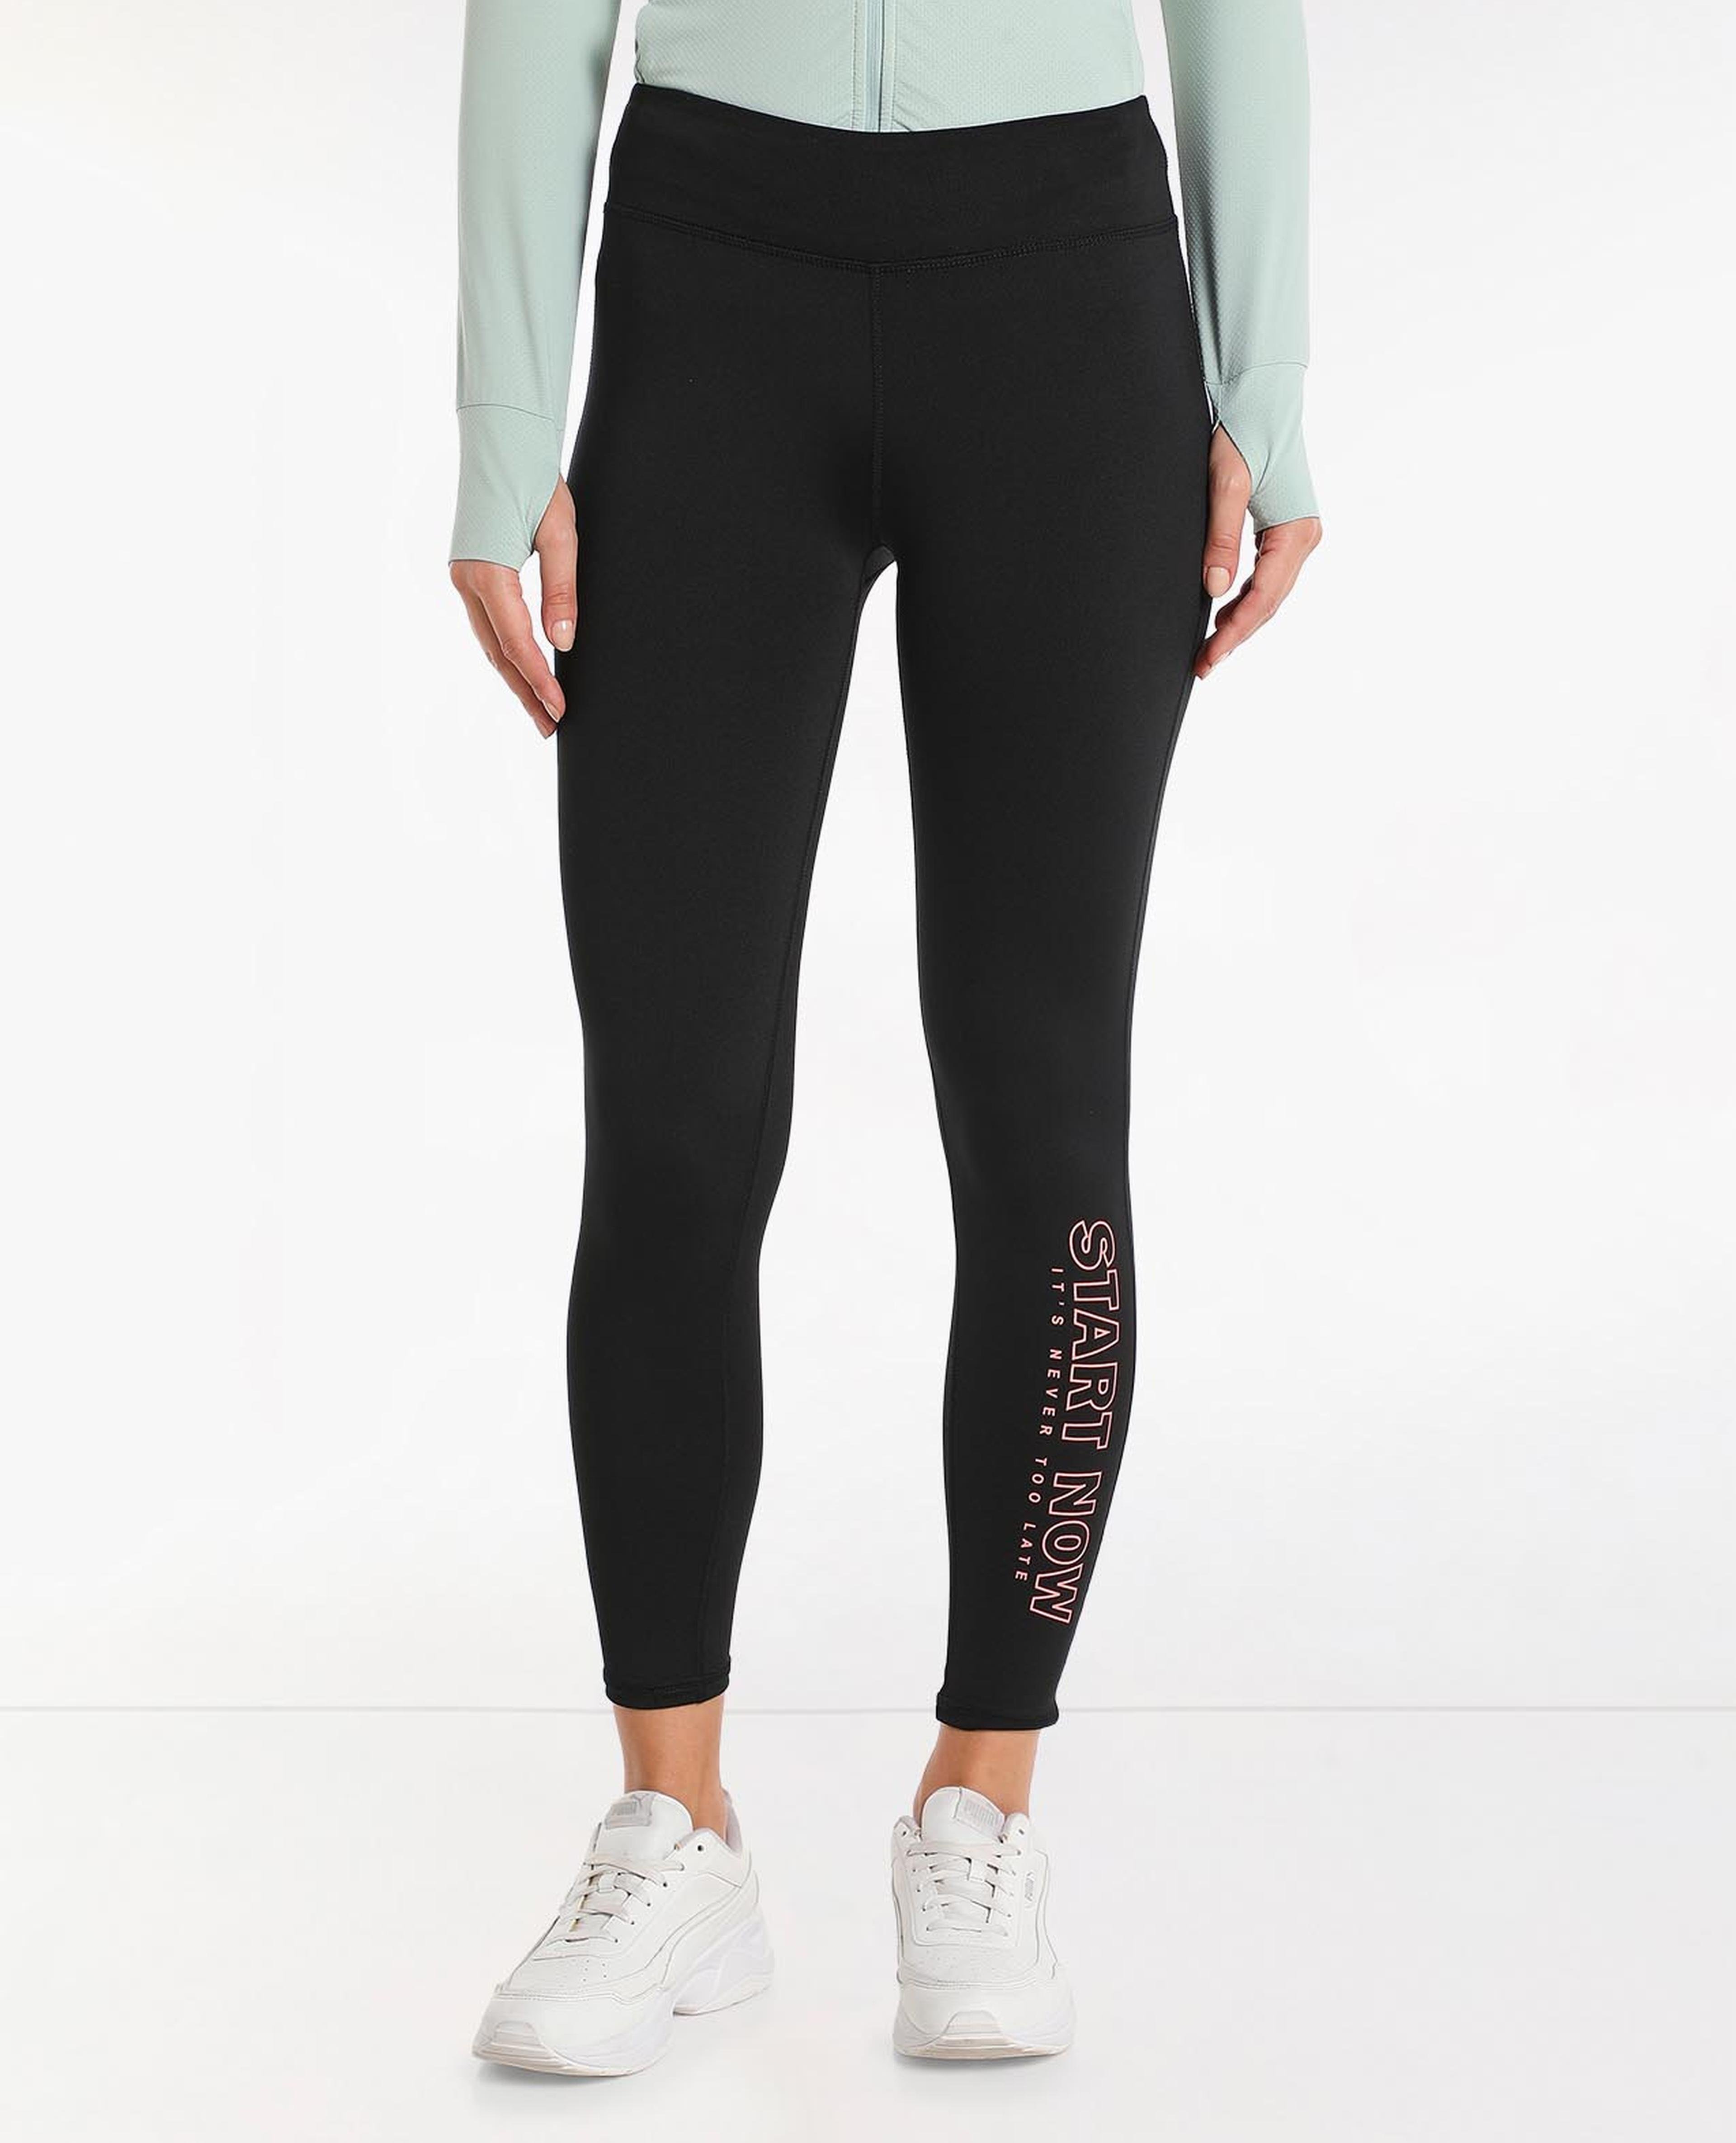 Printed Active Leggings with Elasticated Waist